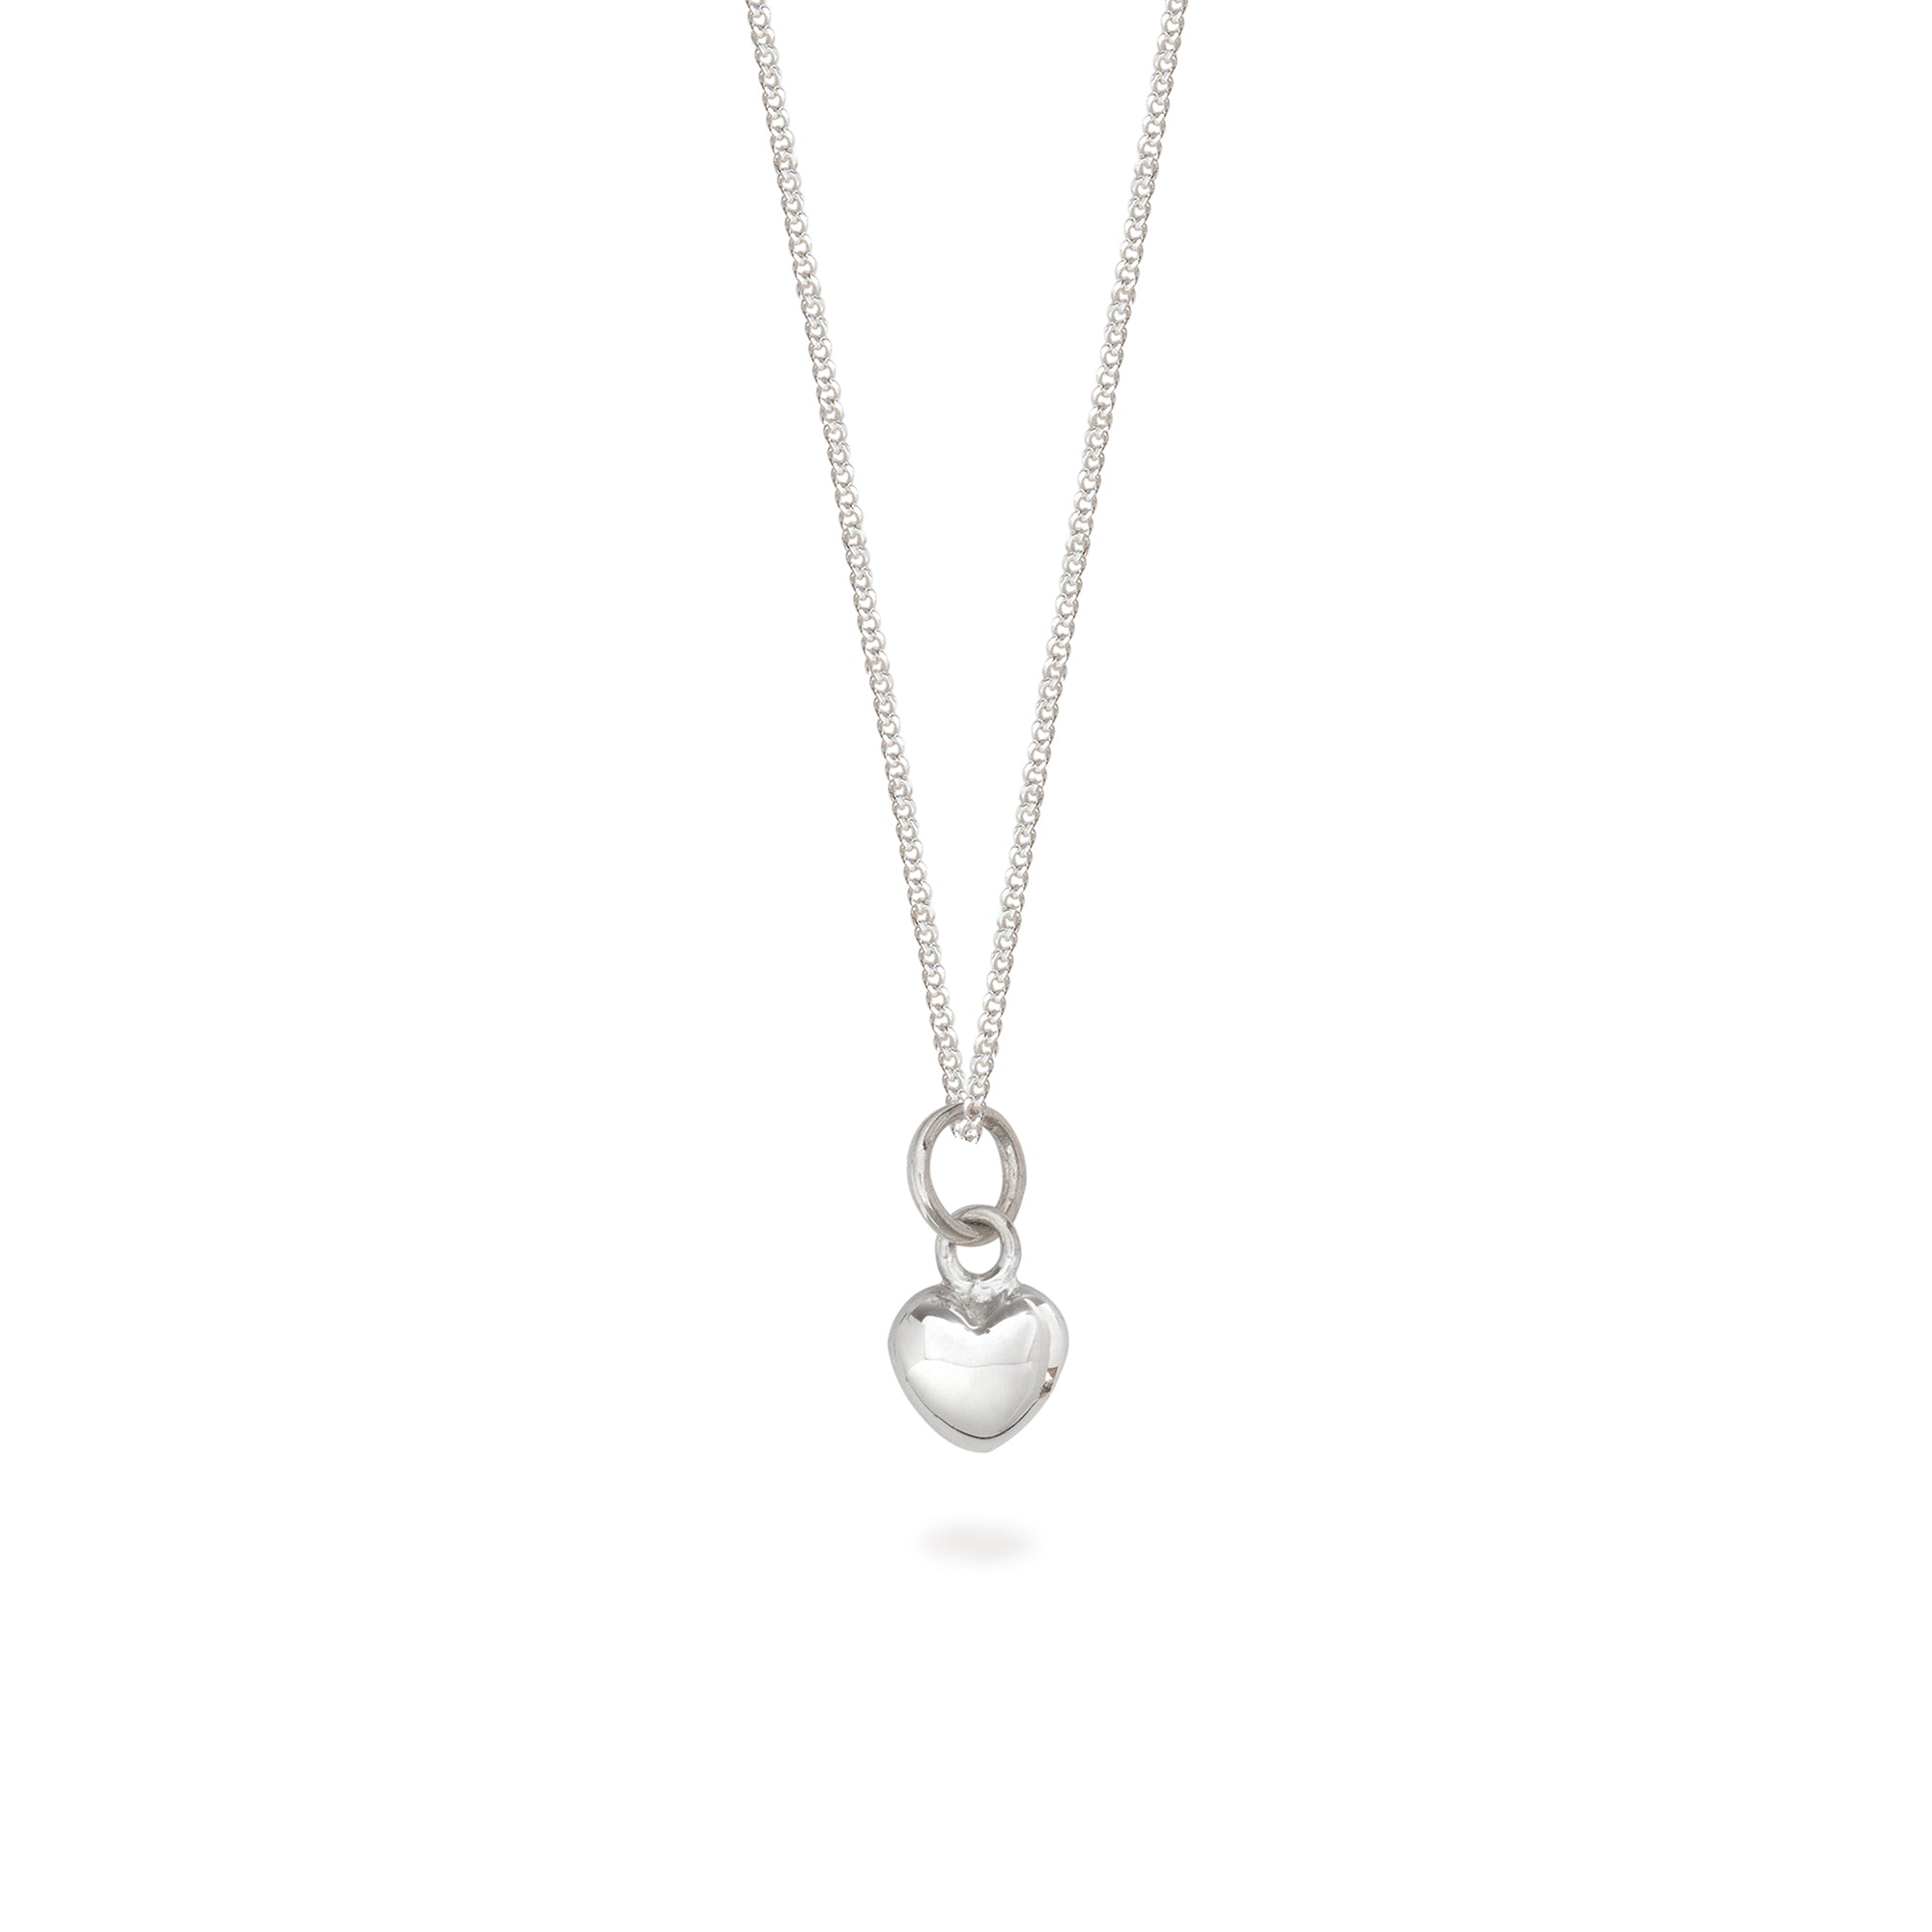 Tiny Heart Charm Necklace Sterling Silver